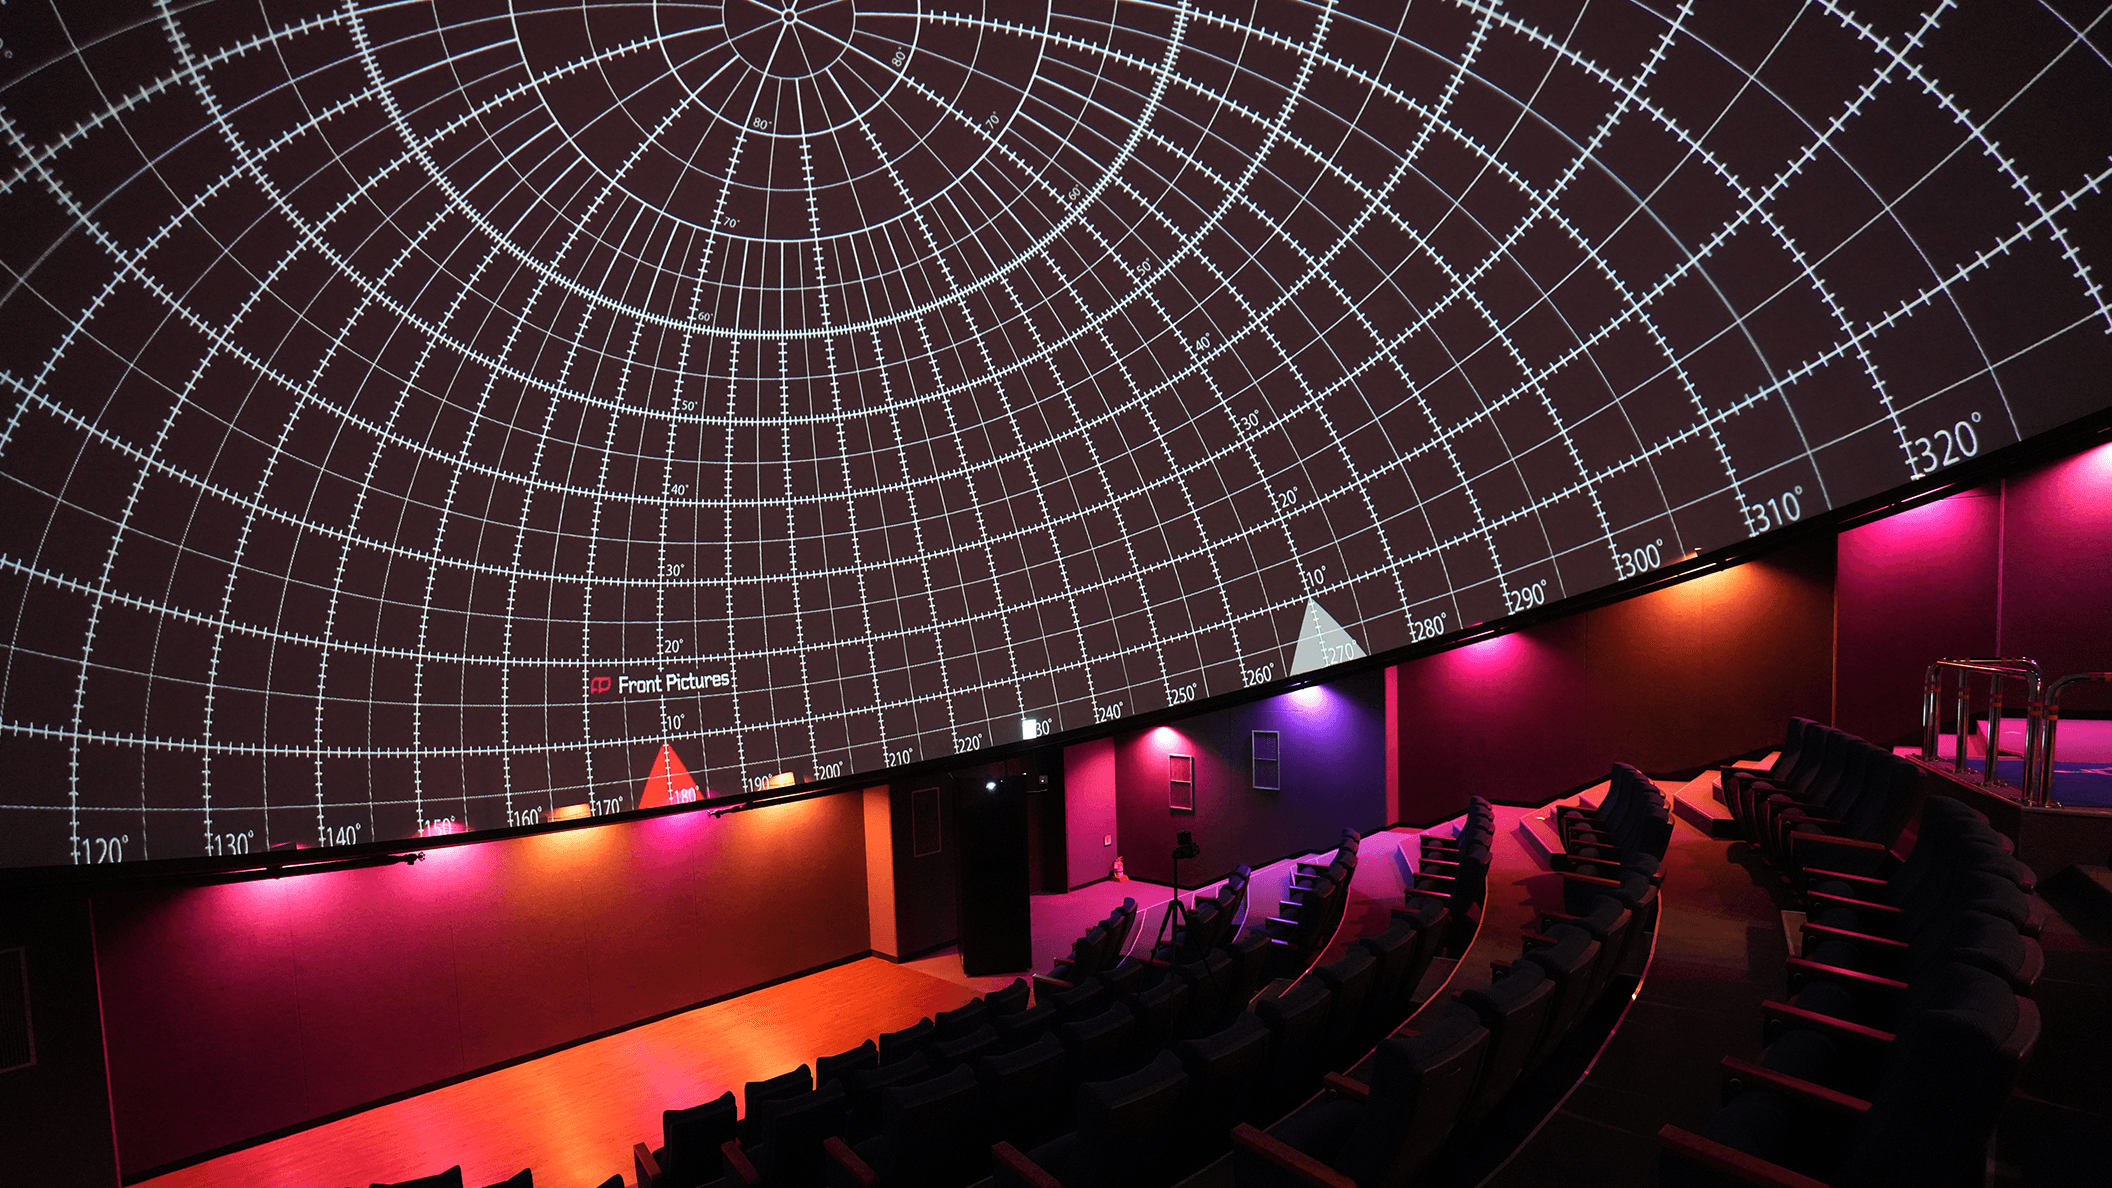 A fulldome theater with a calibration test grid showcasing Screenberry's capability for automatic warping and blending for multi-channel dome projections